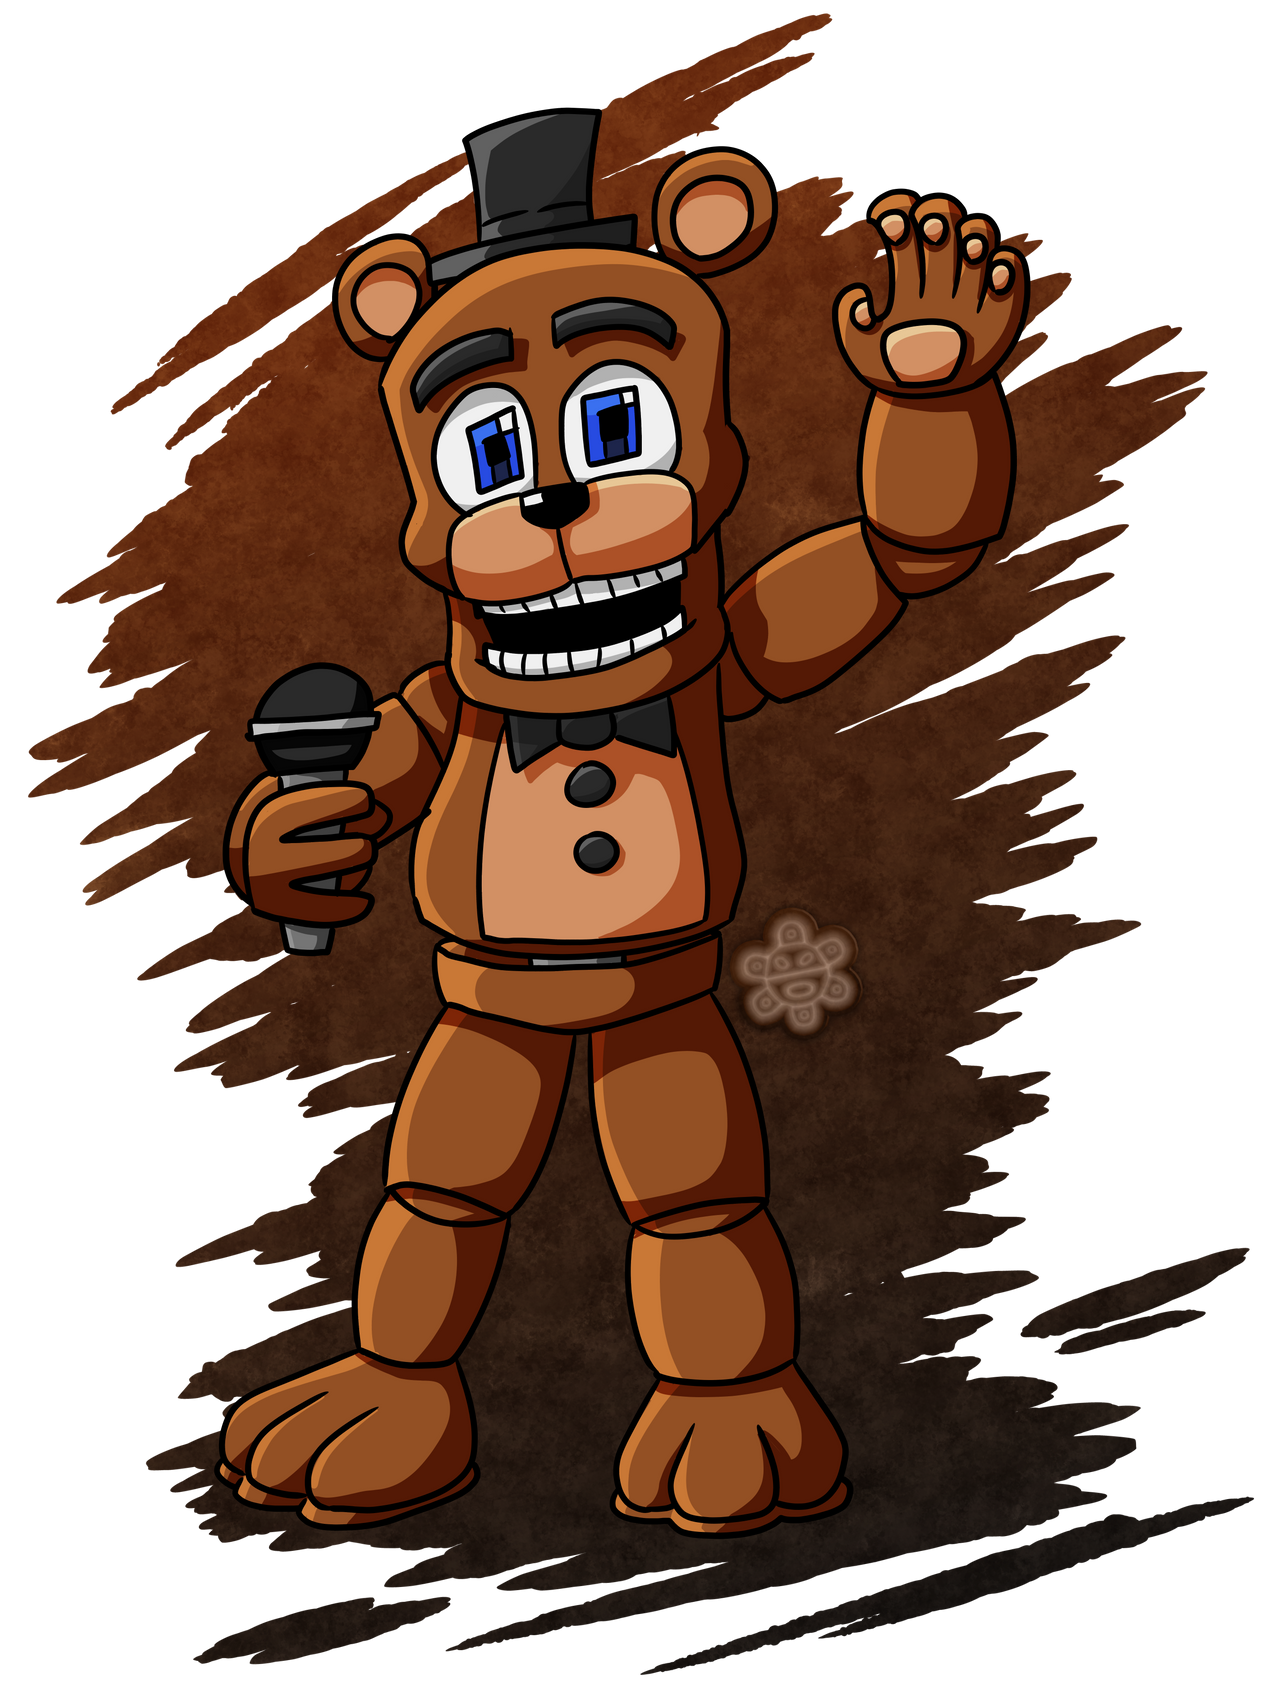 3D Render: Withered Freddy Transparent by MegaMario2001 on DeviantArt